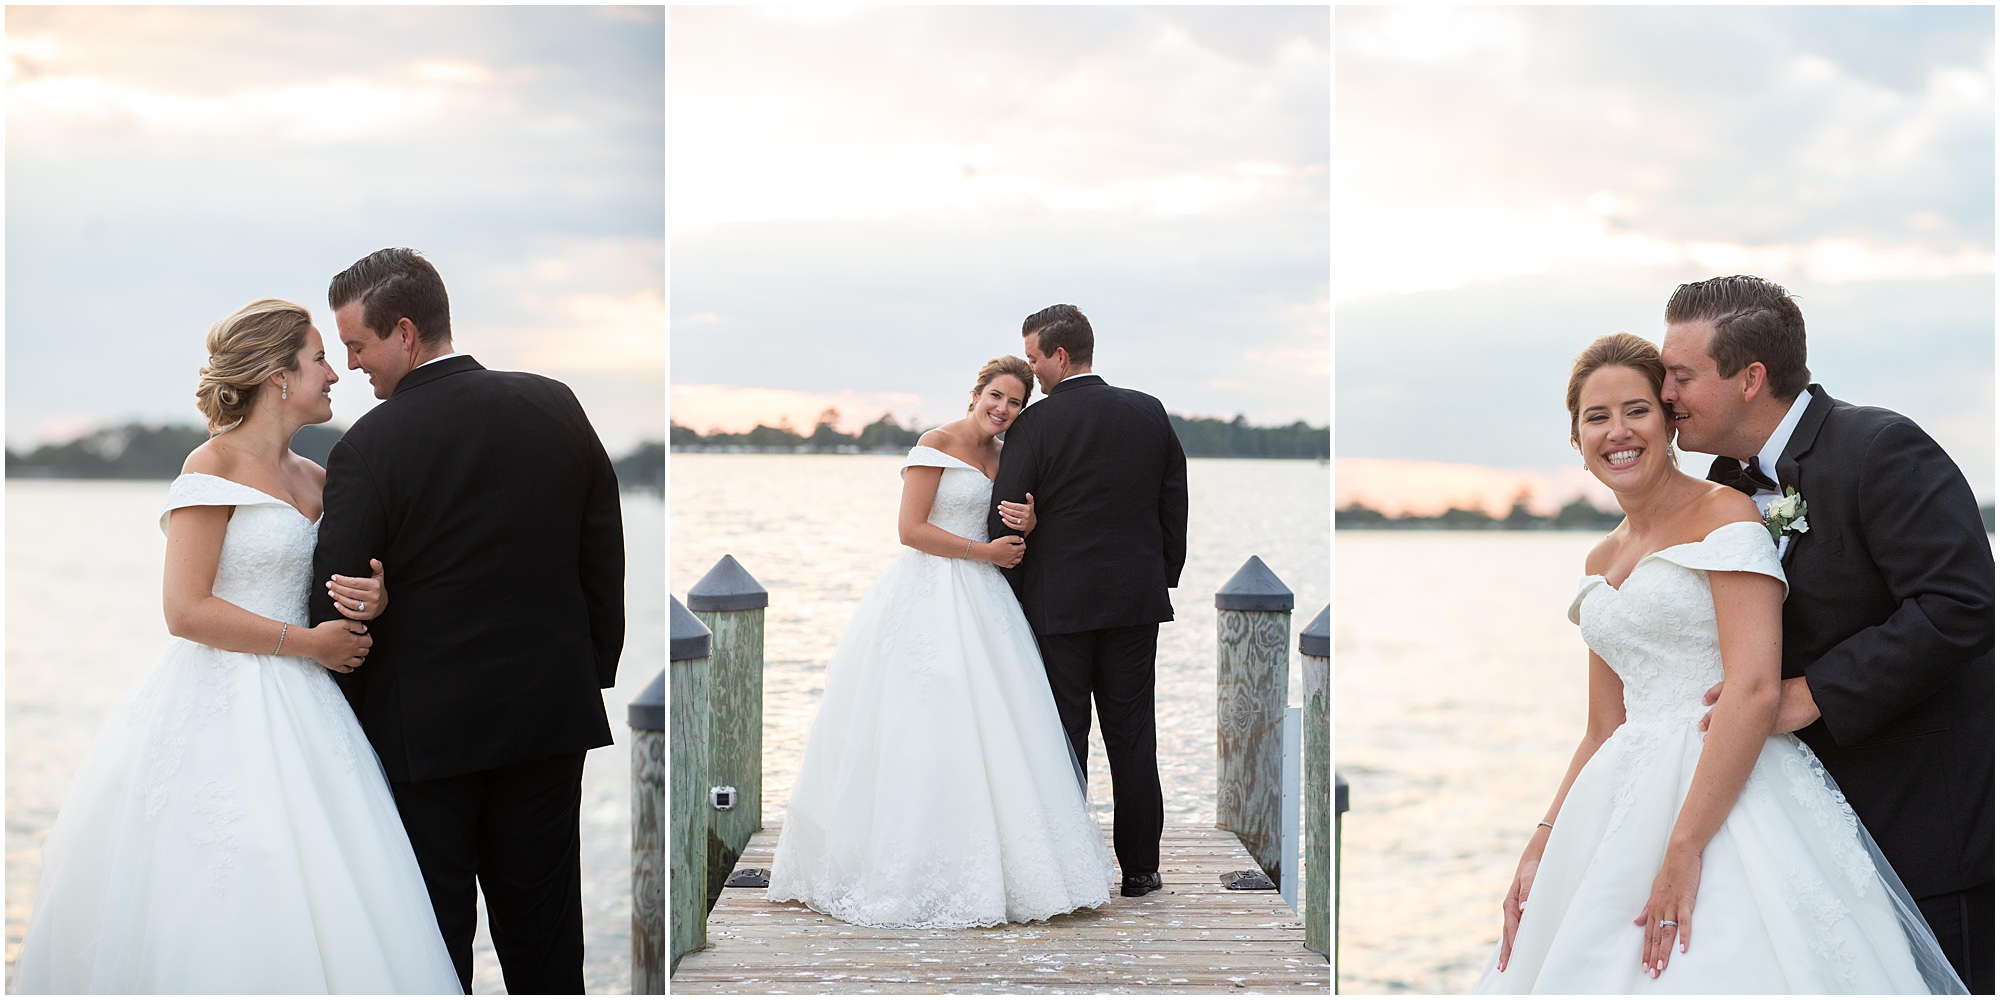 Golden hour waterfront photos at black tie classic wedding